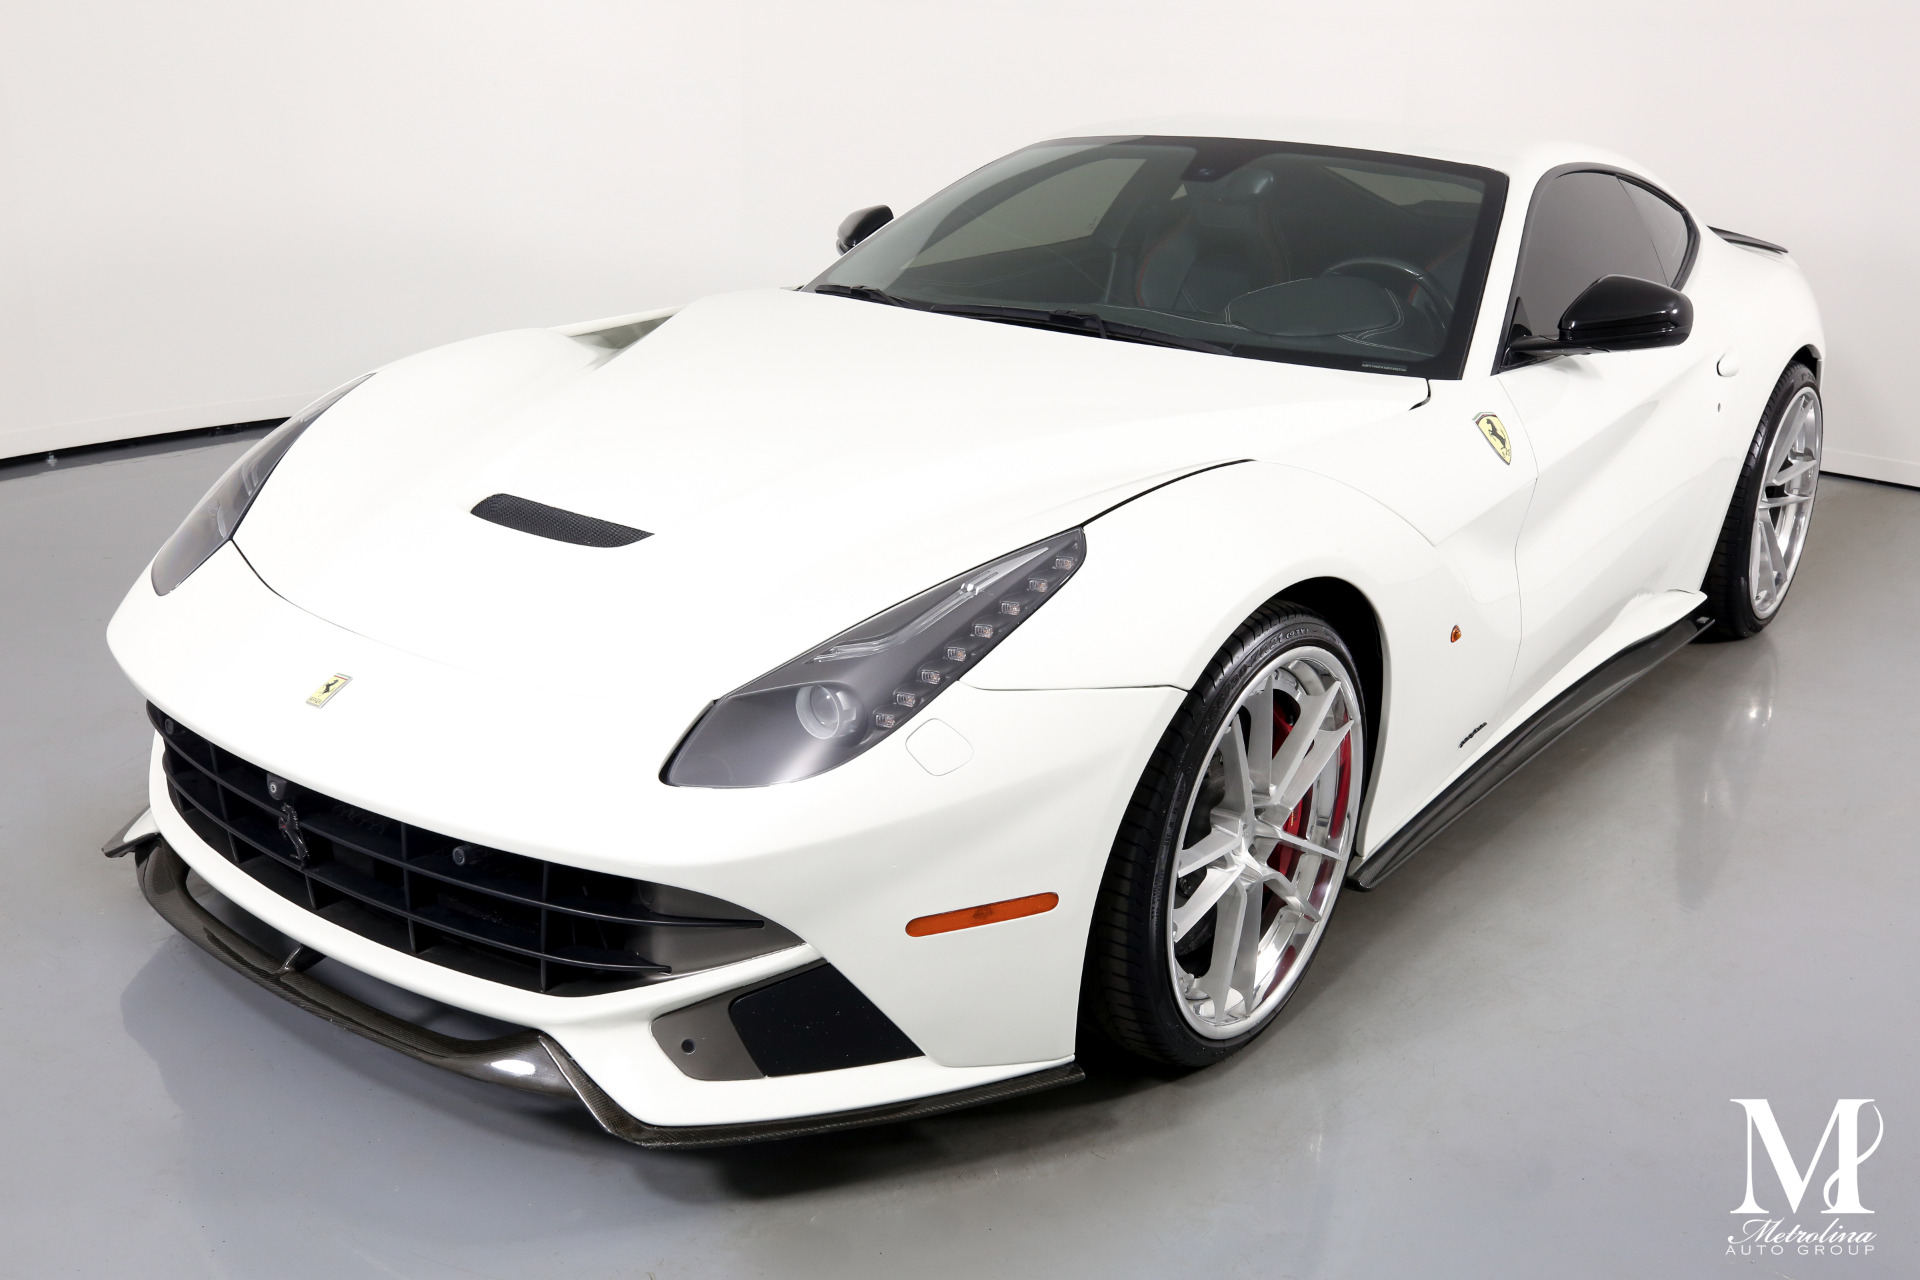 Used 2013 Ferrari F12berlinetta for sale Sold at Metrolina Auto Group in Charlotte NC 28217 - 4